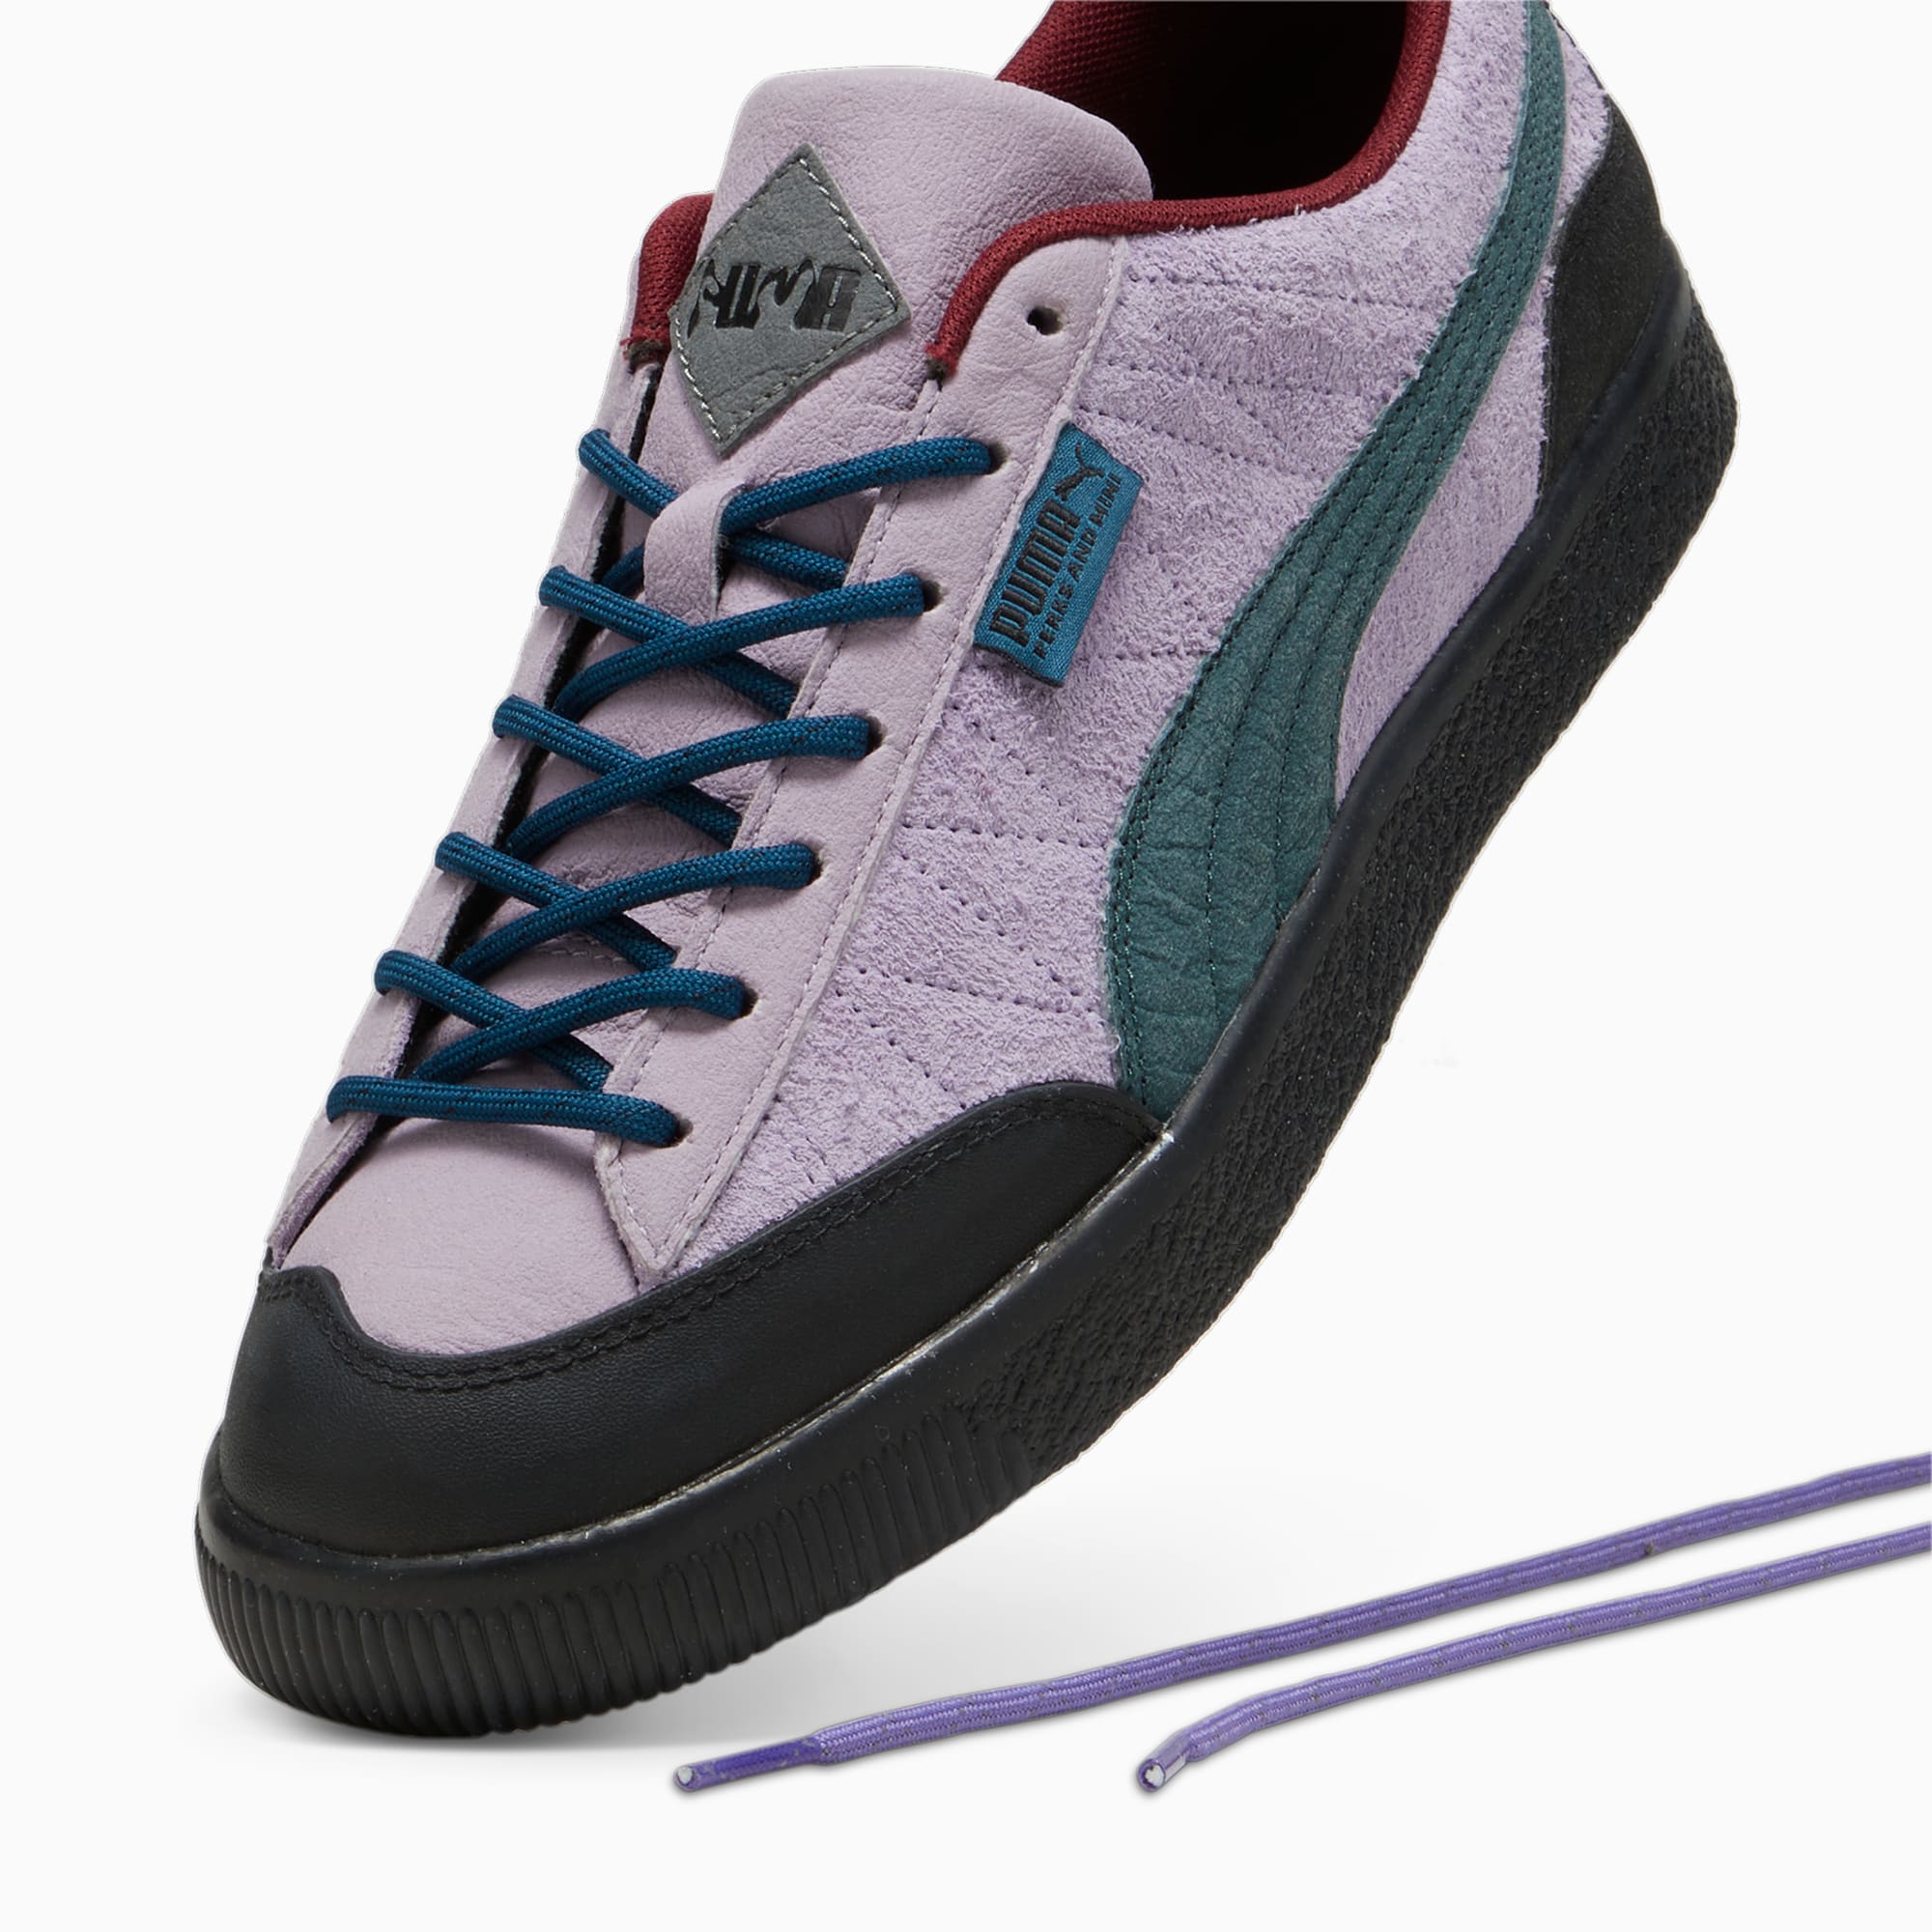 Women's PUMA X Perks And Mini Clyde Sneakers, Lavender Shock/Ocean Tropic, Size 35,5, Shoes